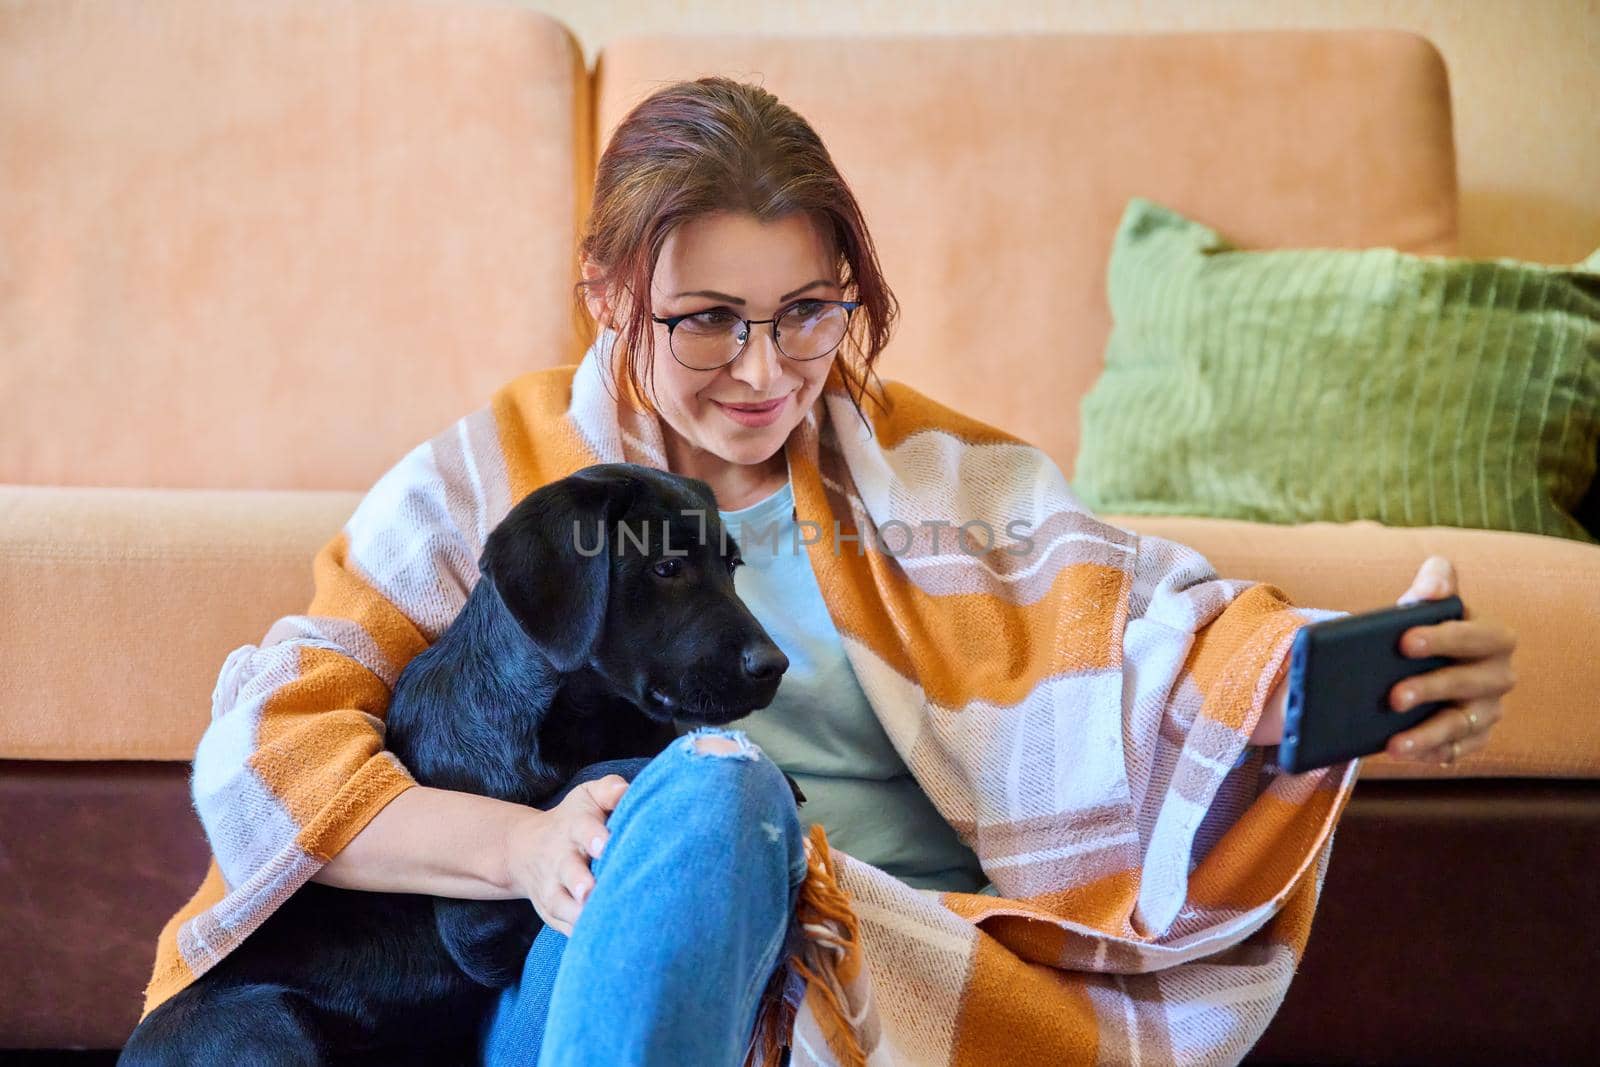 Winter autumn portrait of smiling woman and dog at home. Middle-aged female in warm blanket hugging her pet black labrador puppy takes selfie on smartphone. Lifestyle, love, pets, 40s people concept